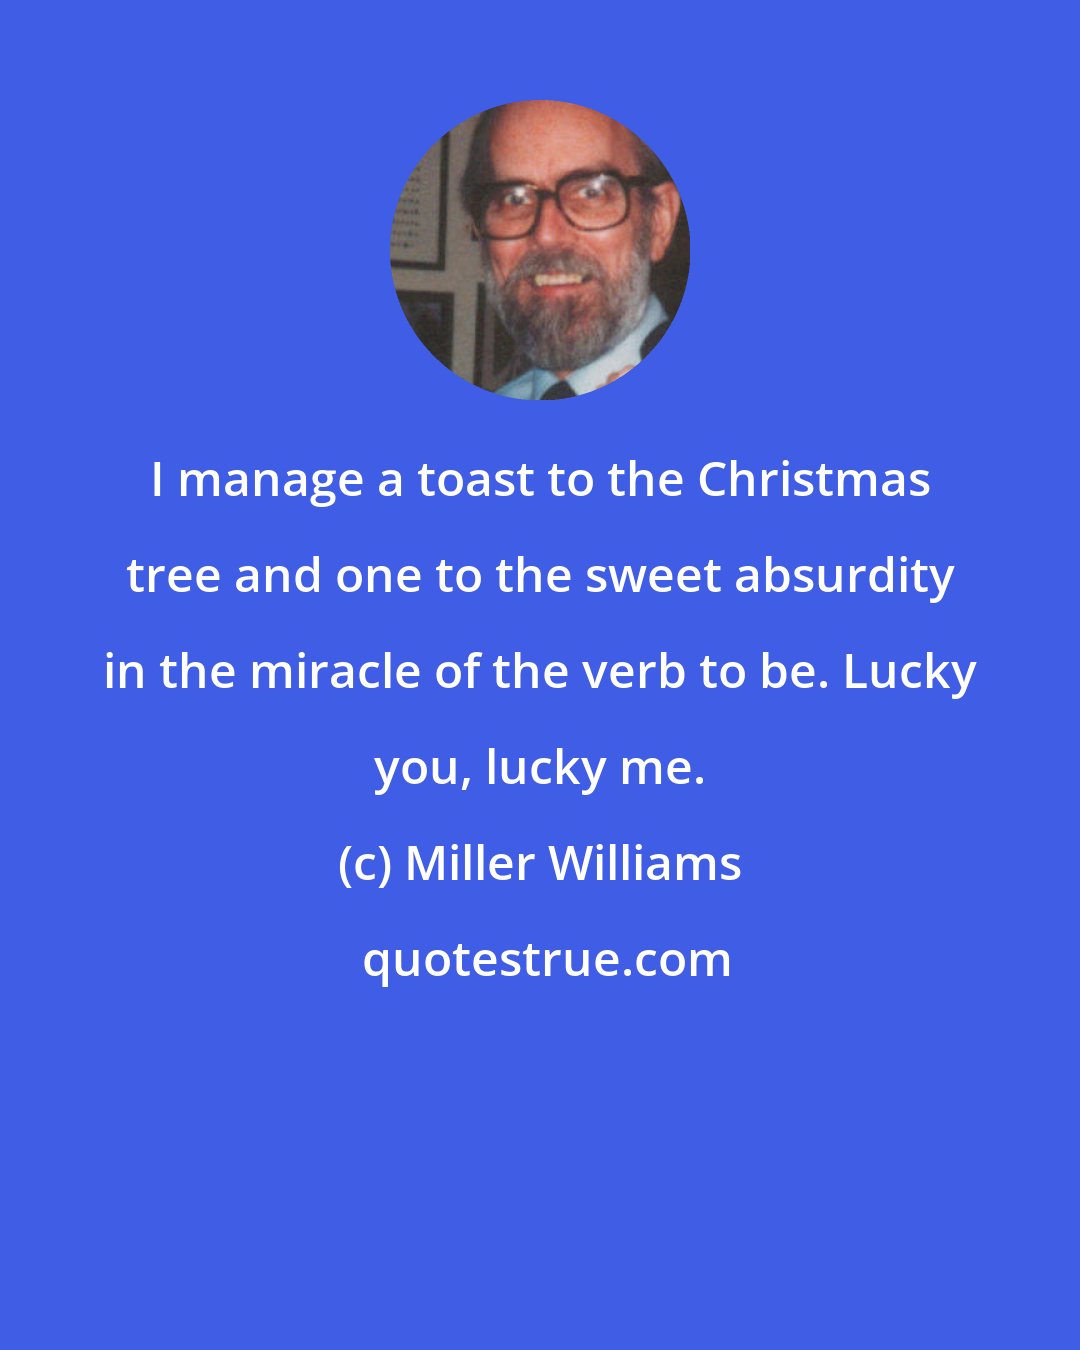 Miller Williams: I manage a toast to the Christmas tree and one to the sweet absurdity in the miracle of the verb to be. Lucky you, lucky me.